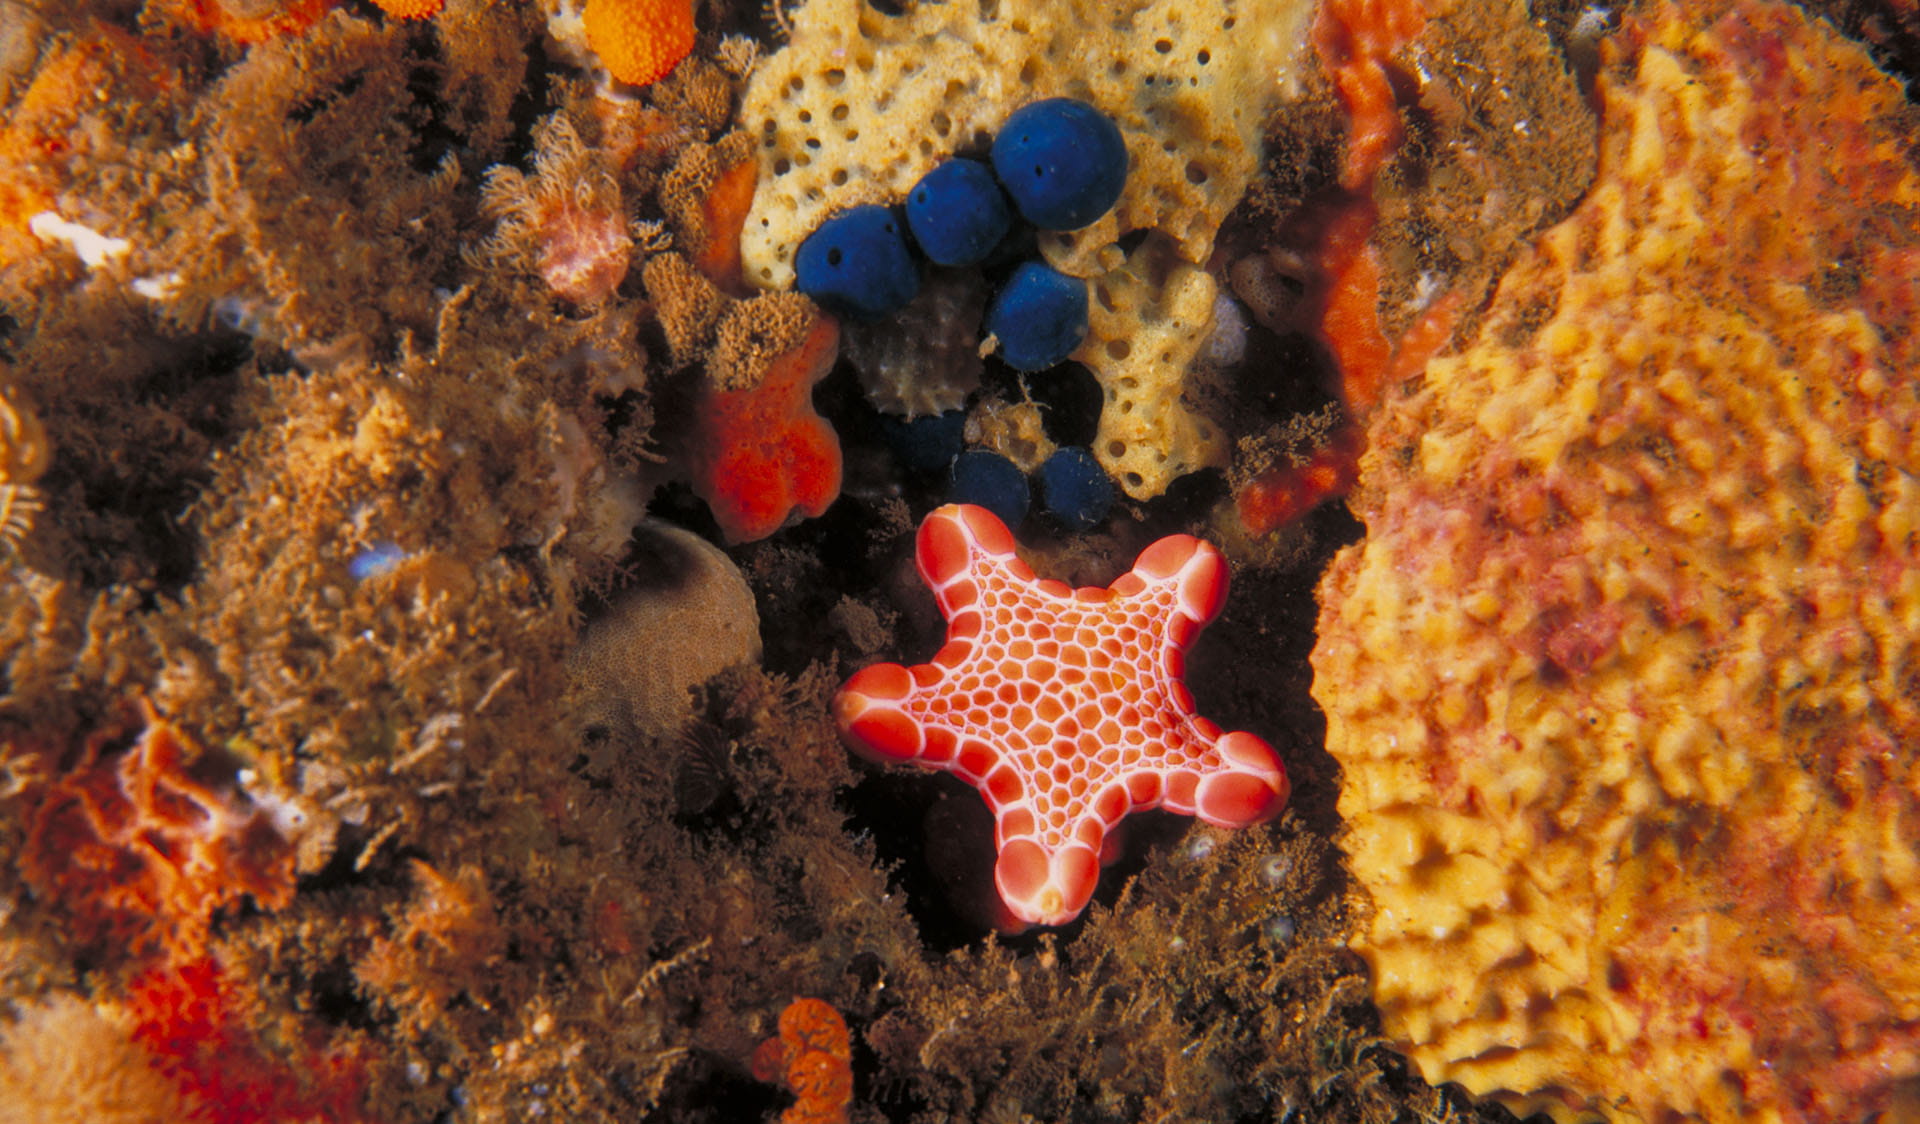 Sea star and coral at Point Addis Marine National Park